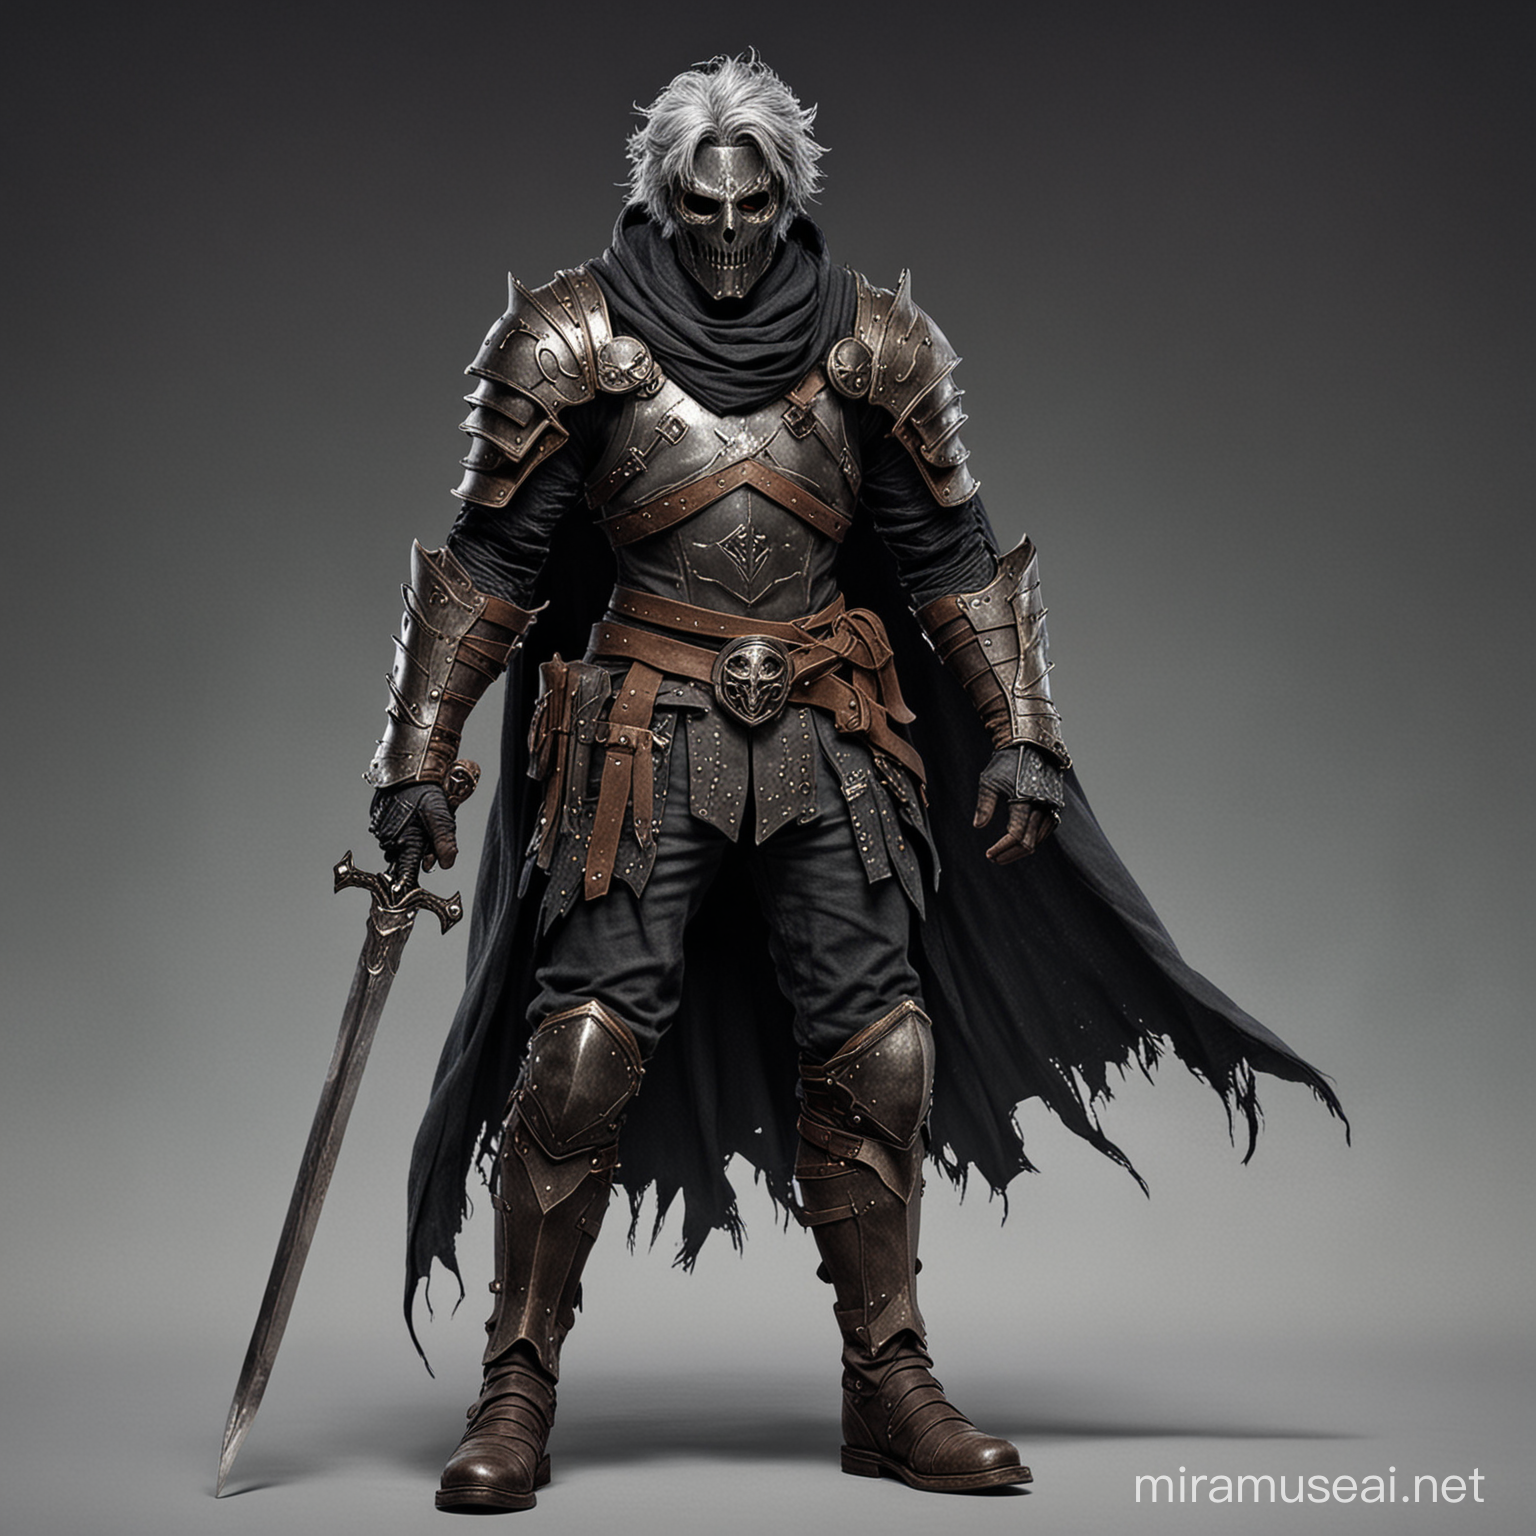 Tall Undead Knight with Dark Hair and Masked Visage